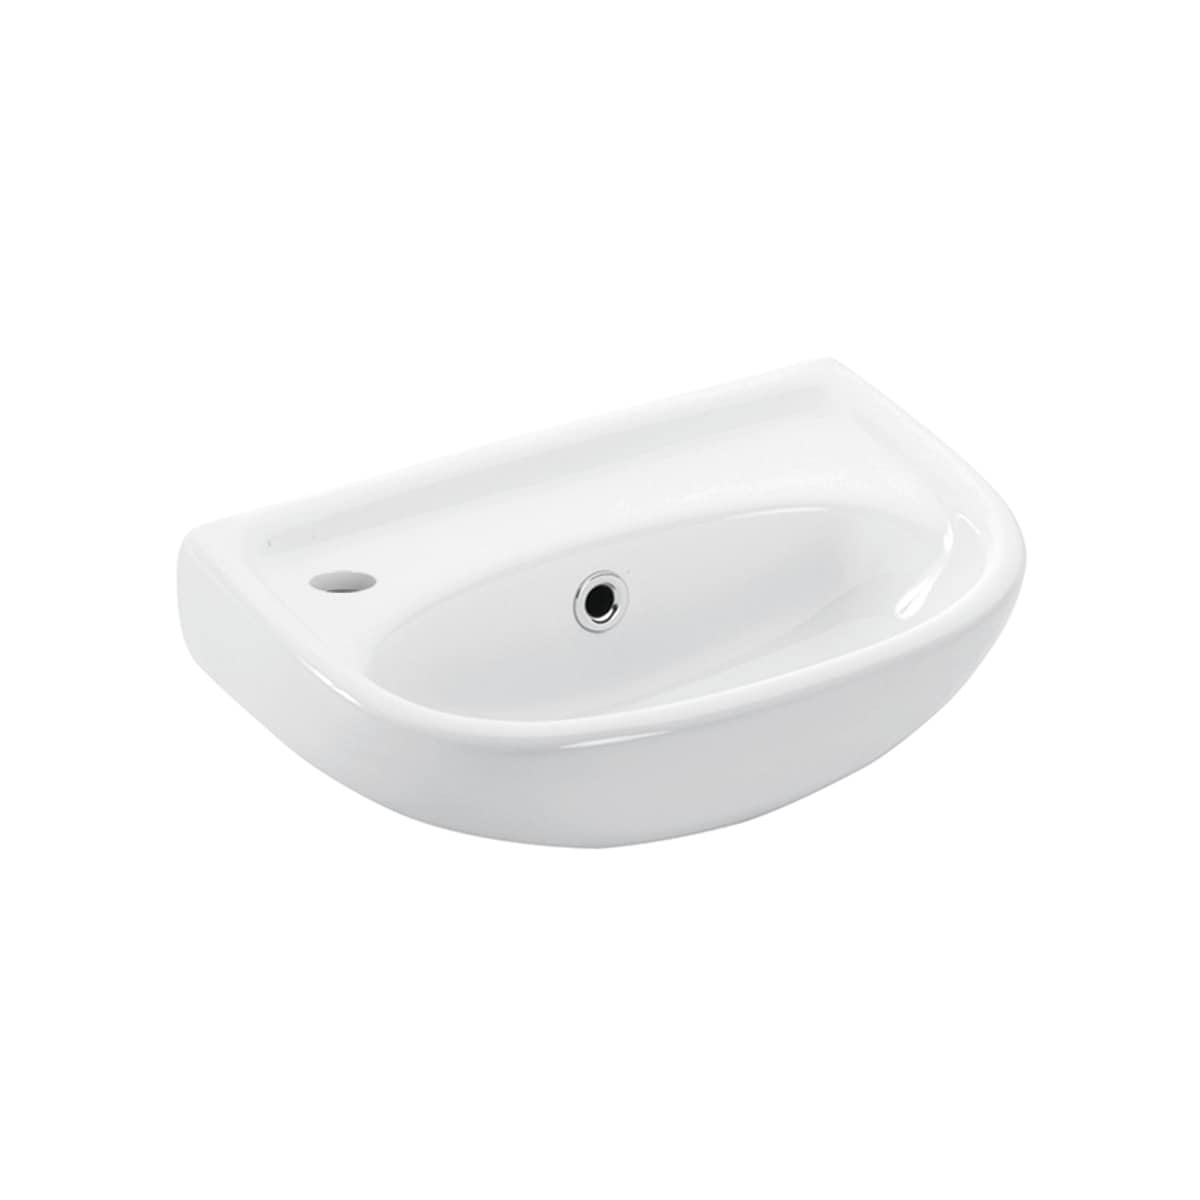 WS Bath Collections Basic Ceramic White Ceramic Wall-mount Rectangular  Modern Bathroom Sink with Overflow Drain (15.5-in x 9.8-in) Lowes.com